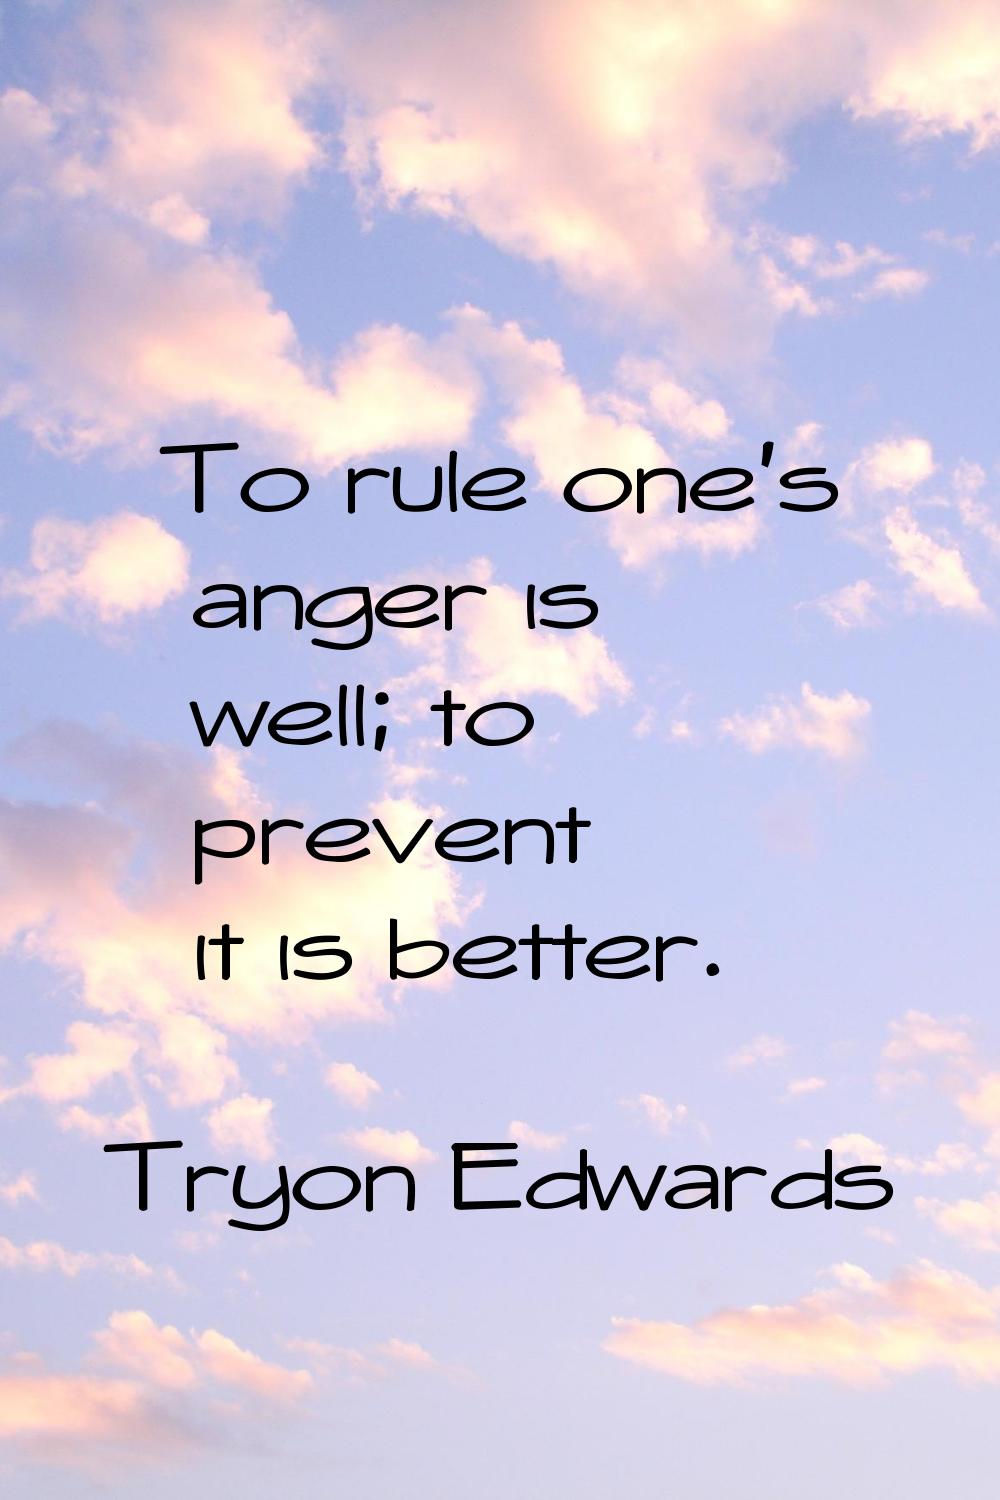 To rule one's anger is well; to prevent it is better.